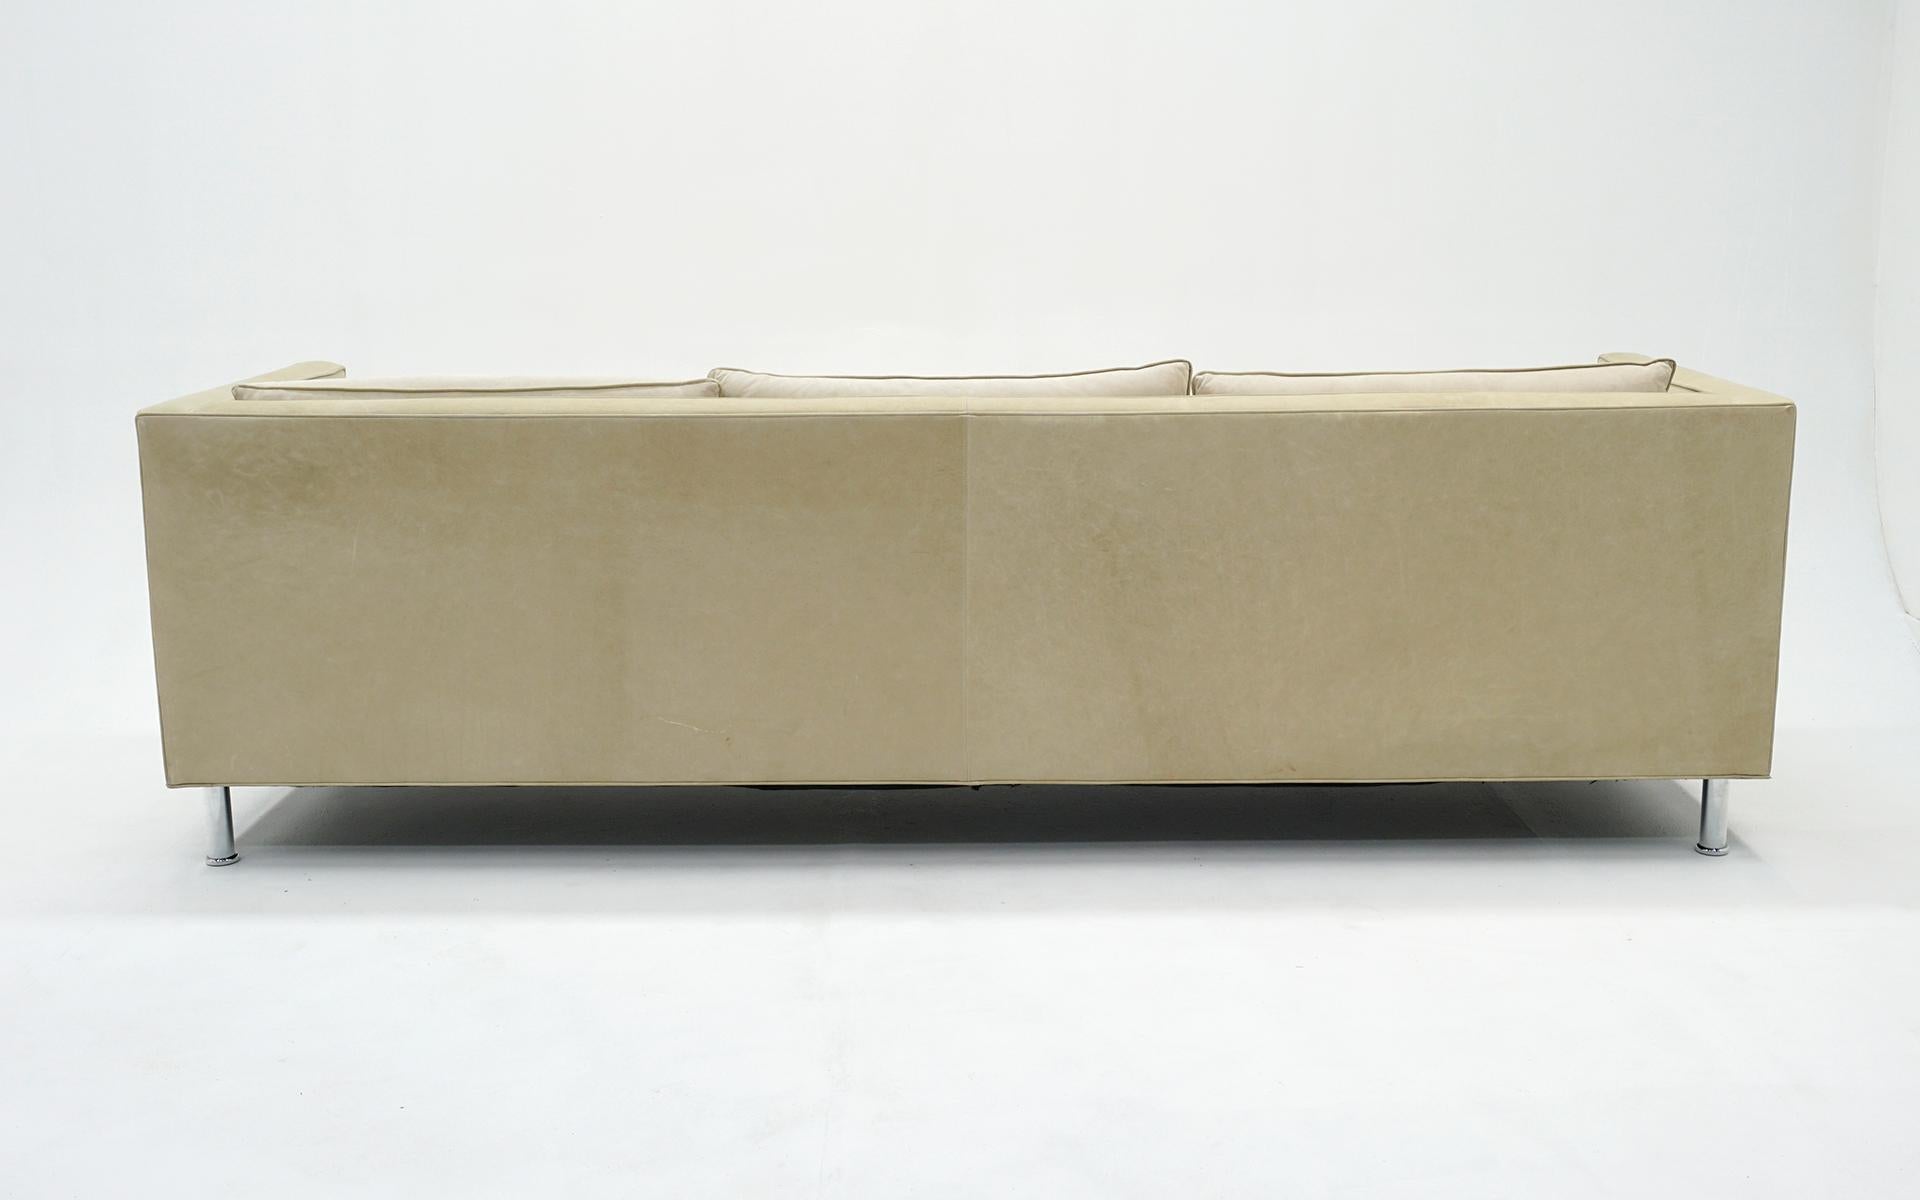 Sofa in Off White /Beige Leather with Mohair Cushions by Niedermaier, Chicago 1